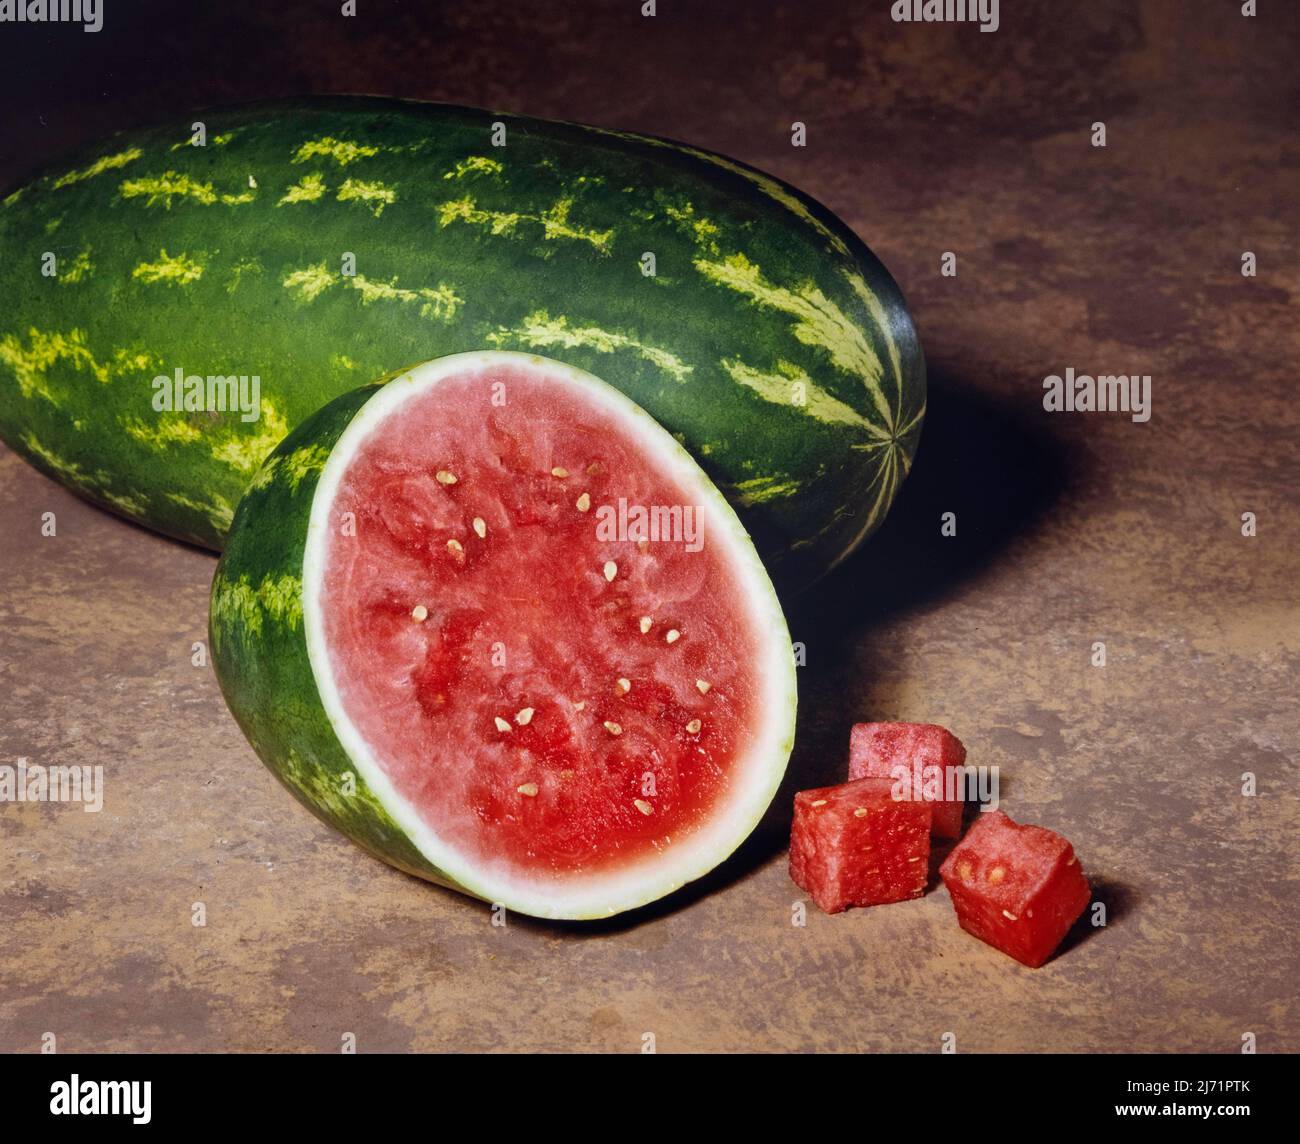 Watermelon cut in half and with cubed pieces.  Image from 6x7cm film transparency. Stock Photo